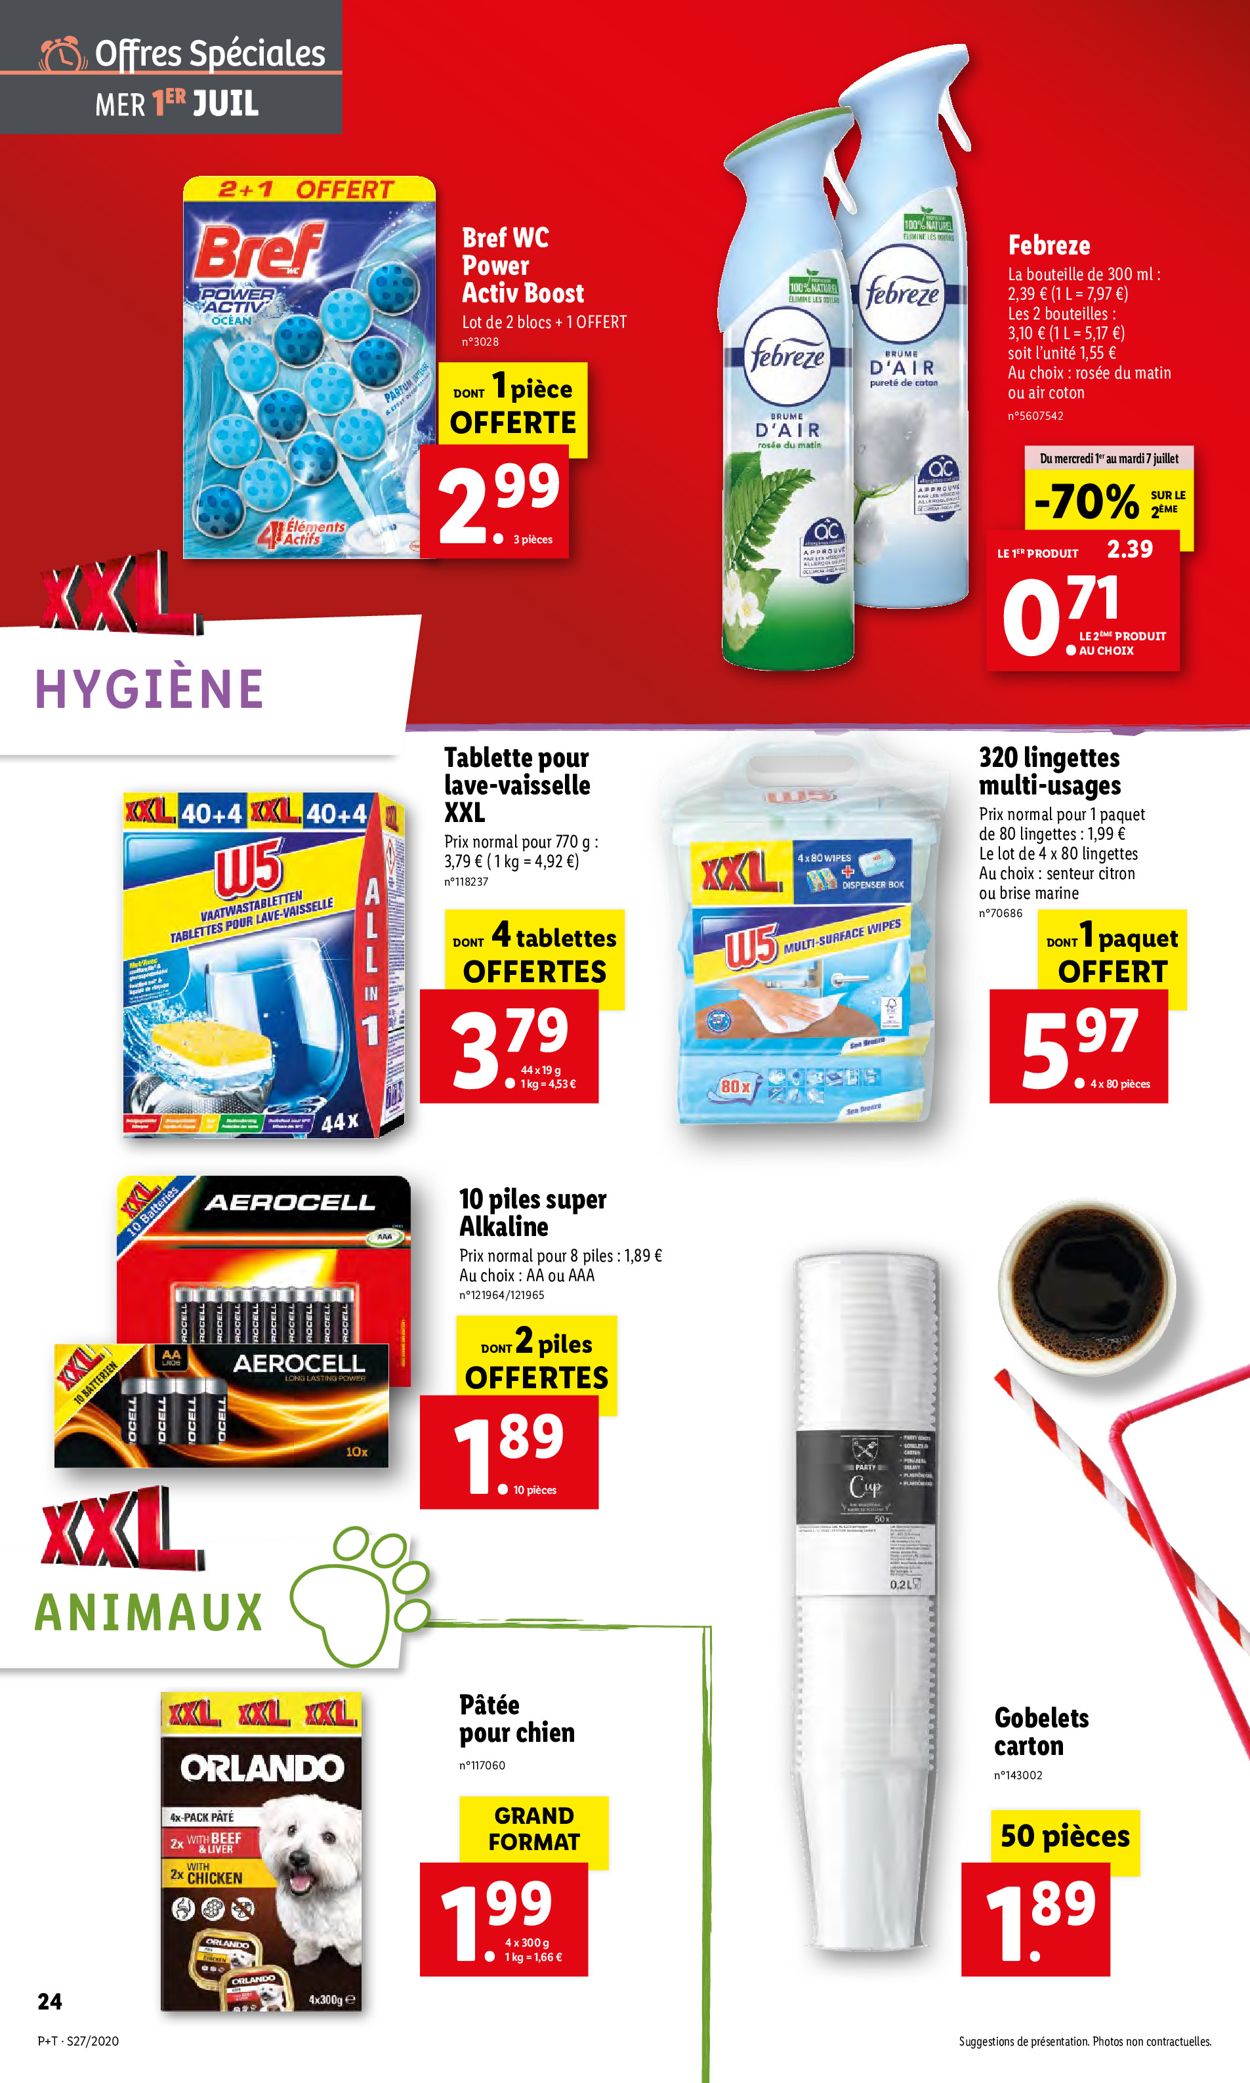 Lidl Catalogue - 01.07-07.07.2020 (Page 24)